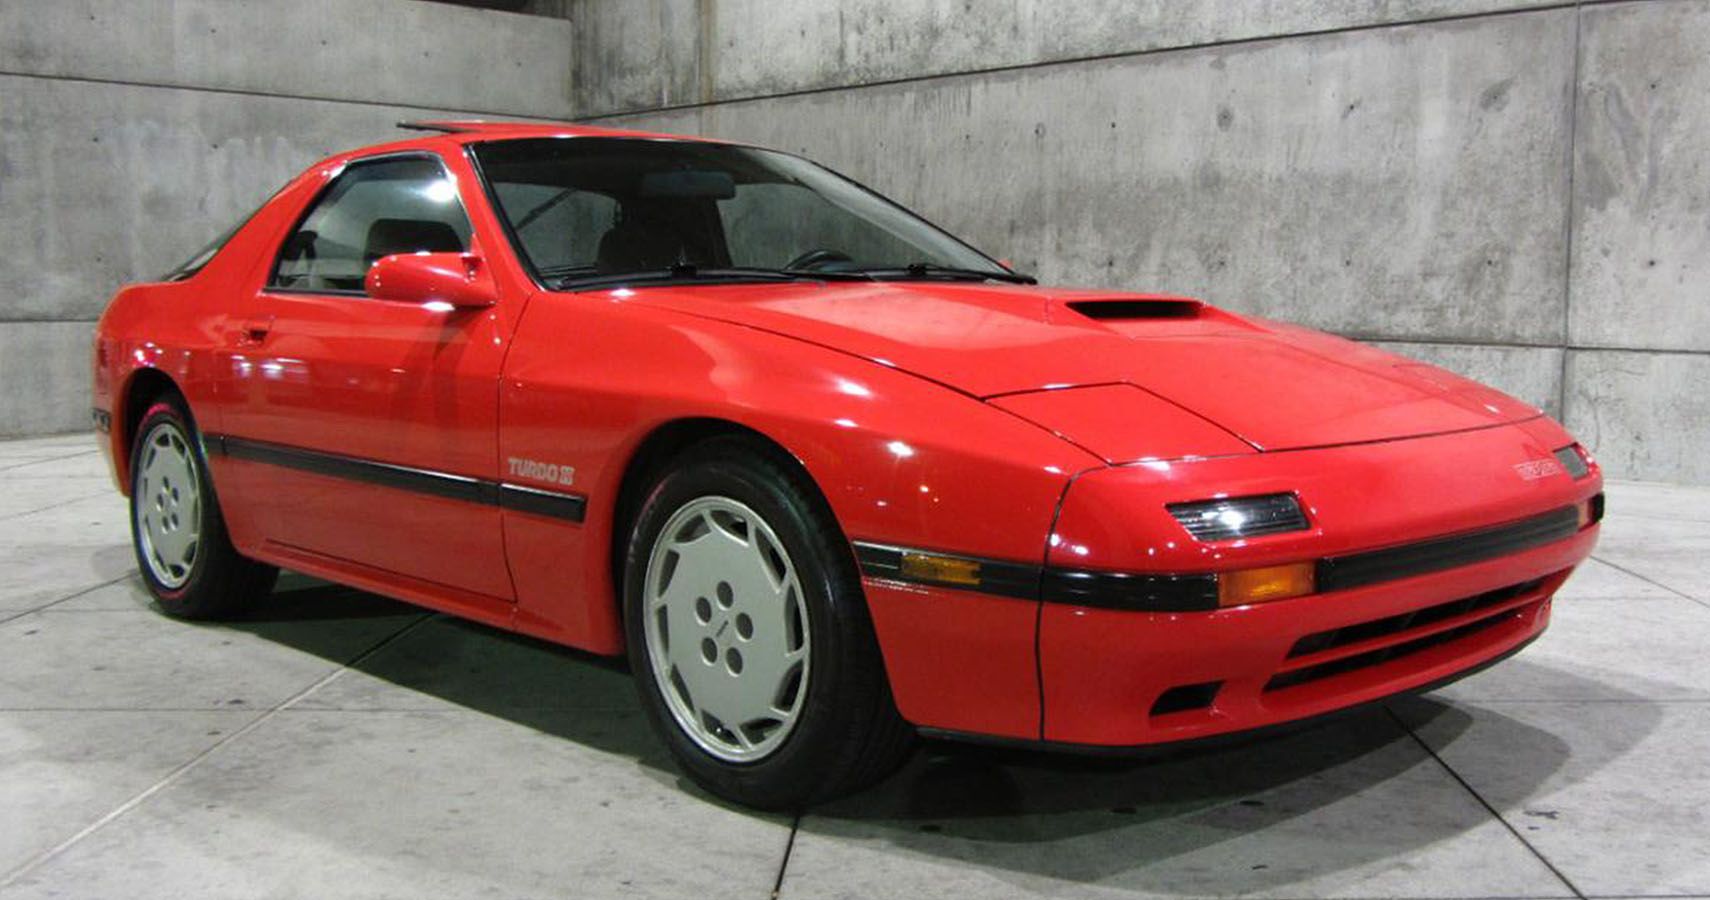 The rotary engine of the Mazda RX-7 was revered